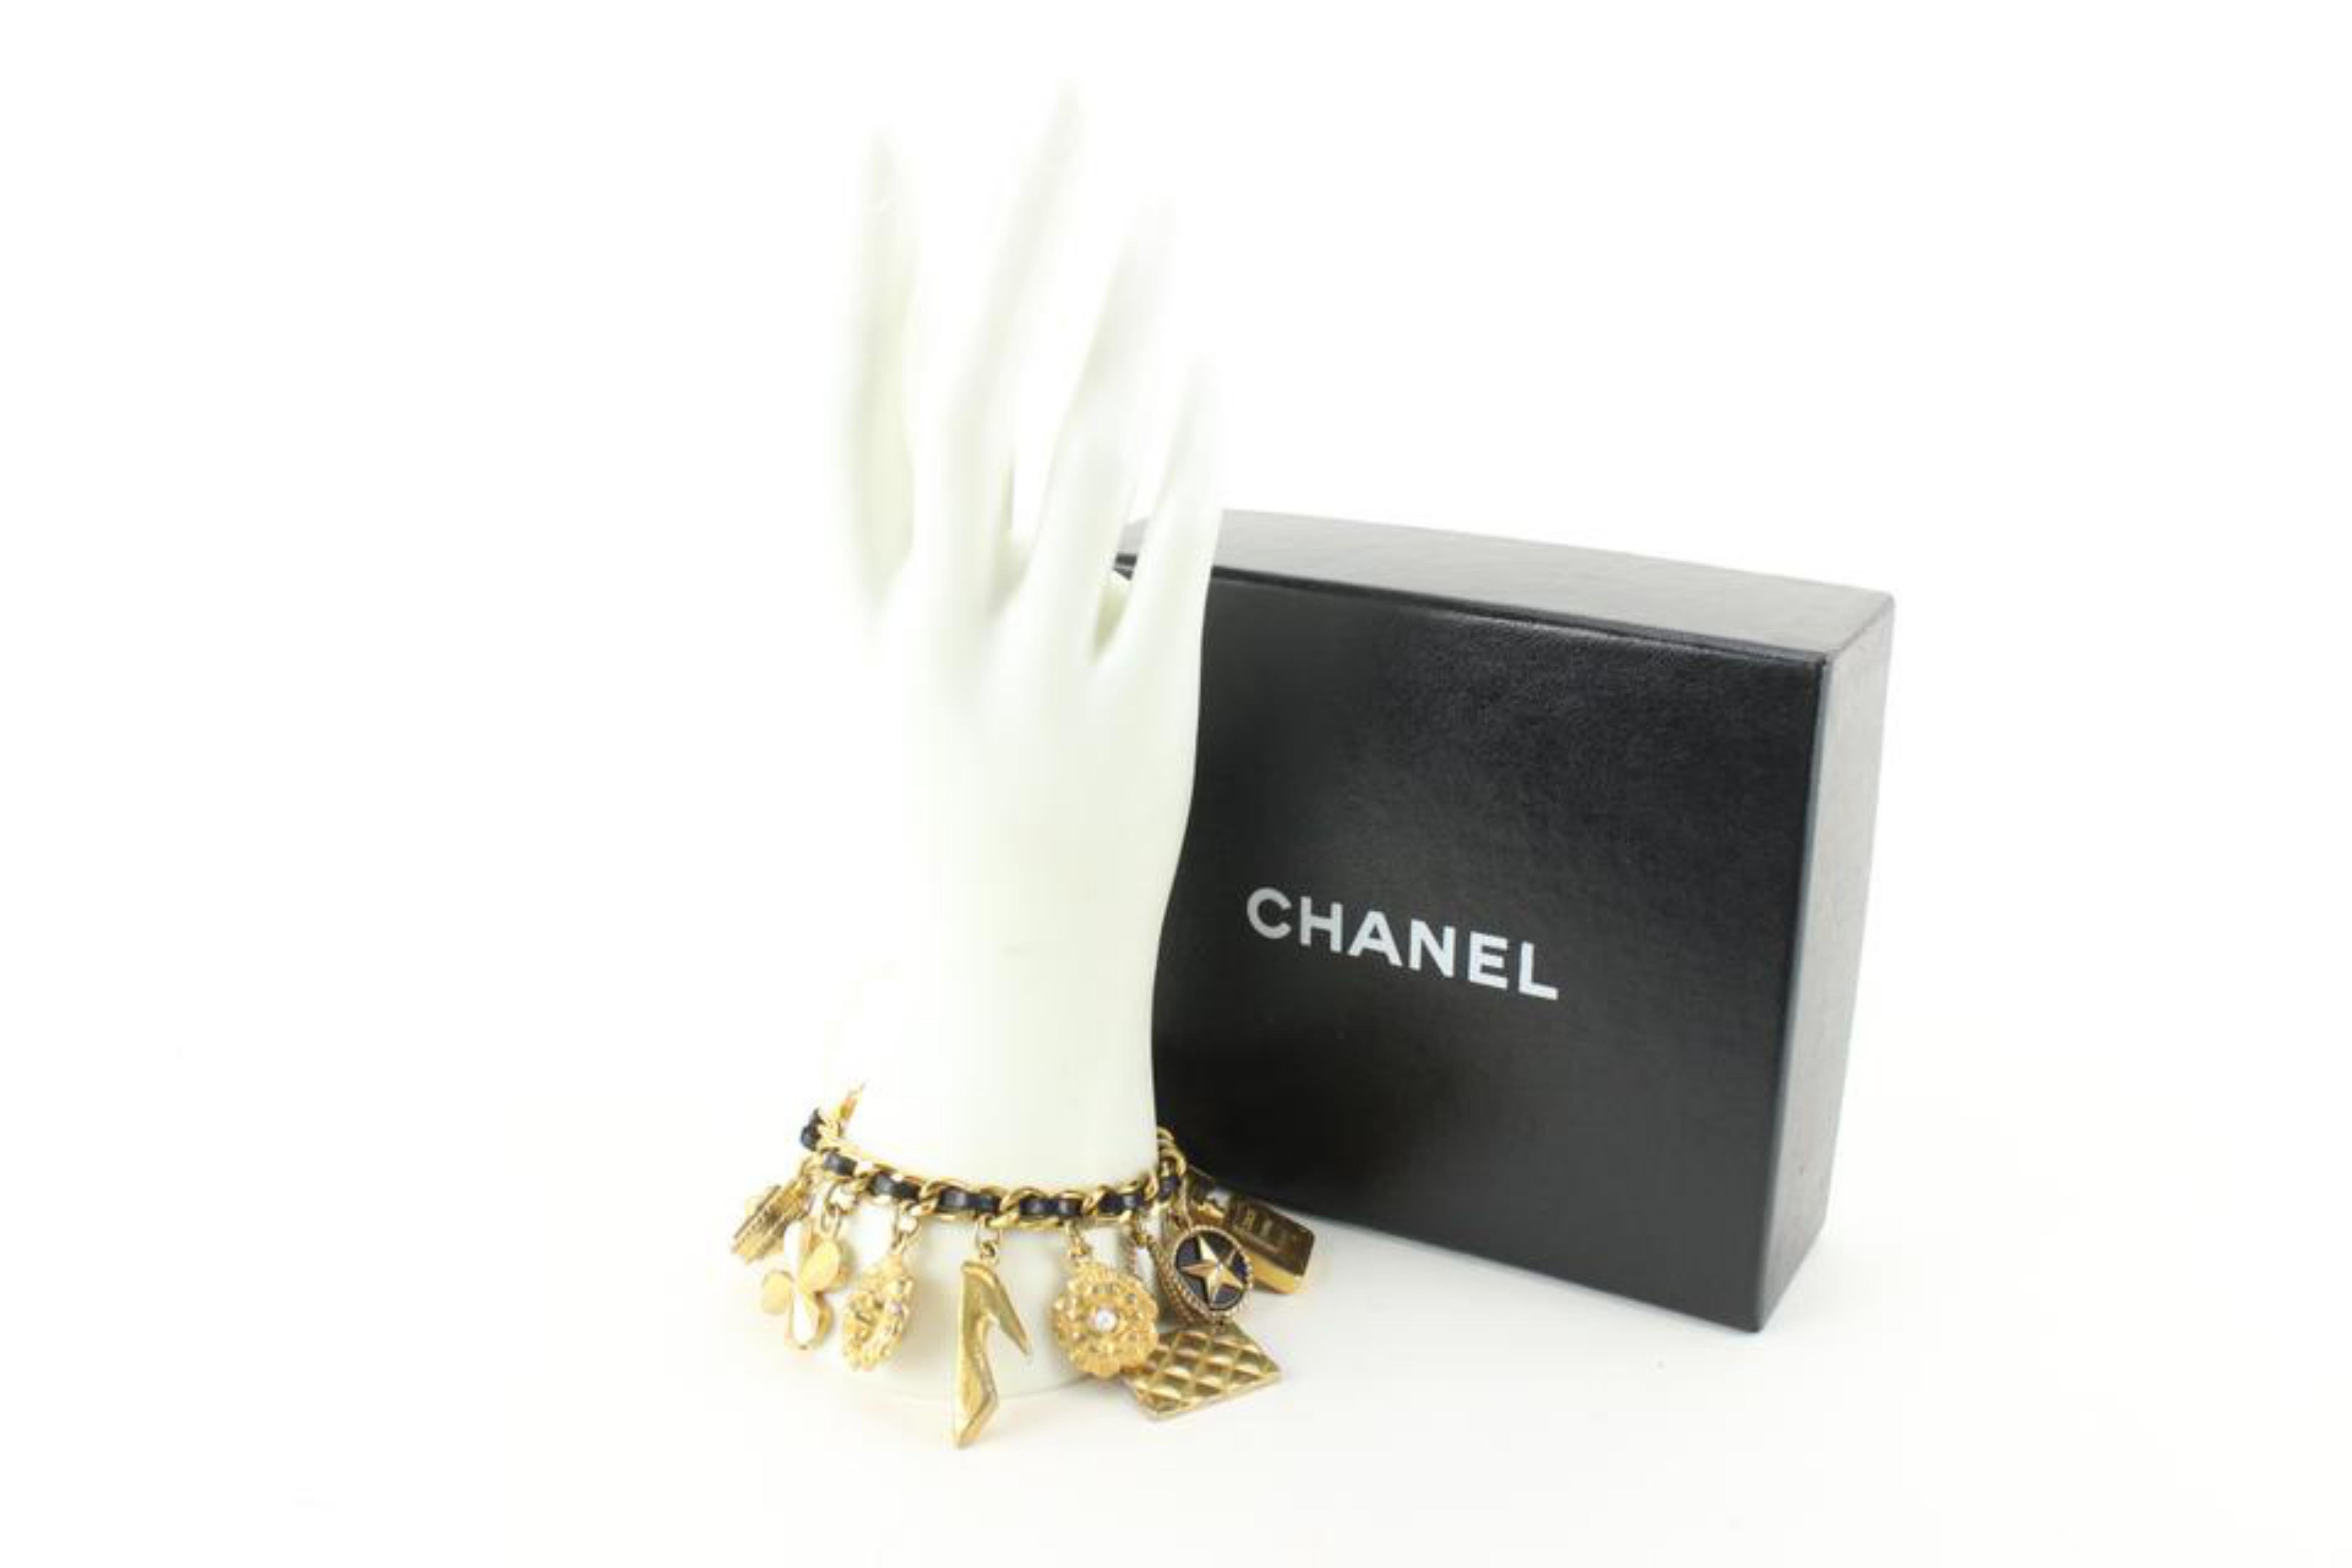 ChanelUltra Rare 95P Charm Bracelet Chain 1ck1024a
Date Code/Serial Number: 95 P
Made In: France
Measurements: Length:  7.5